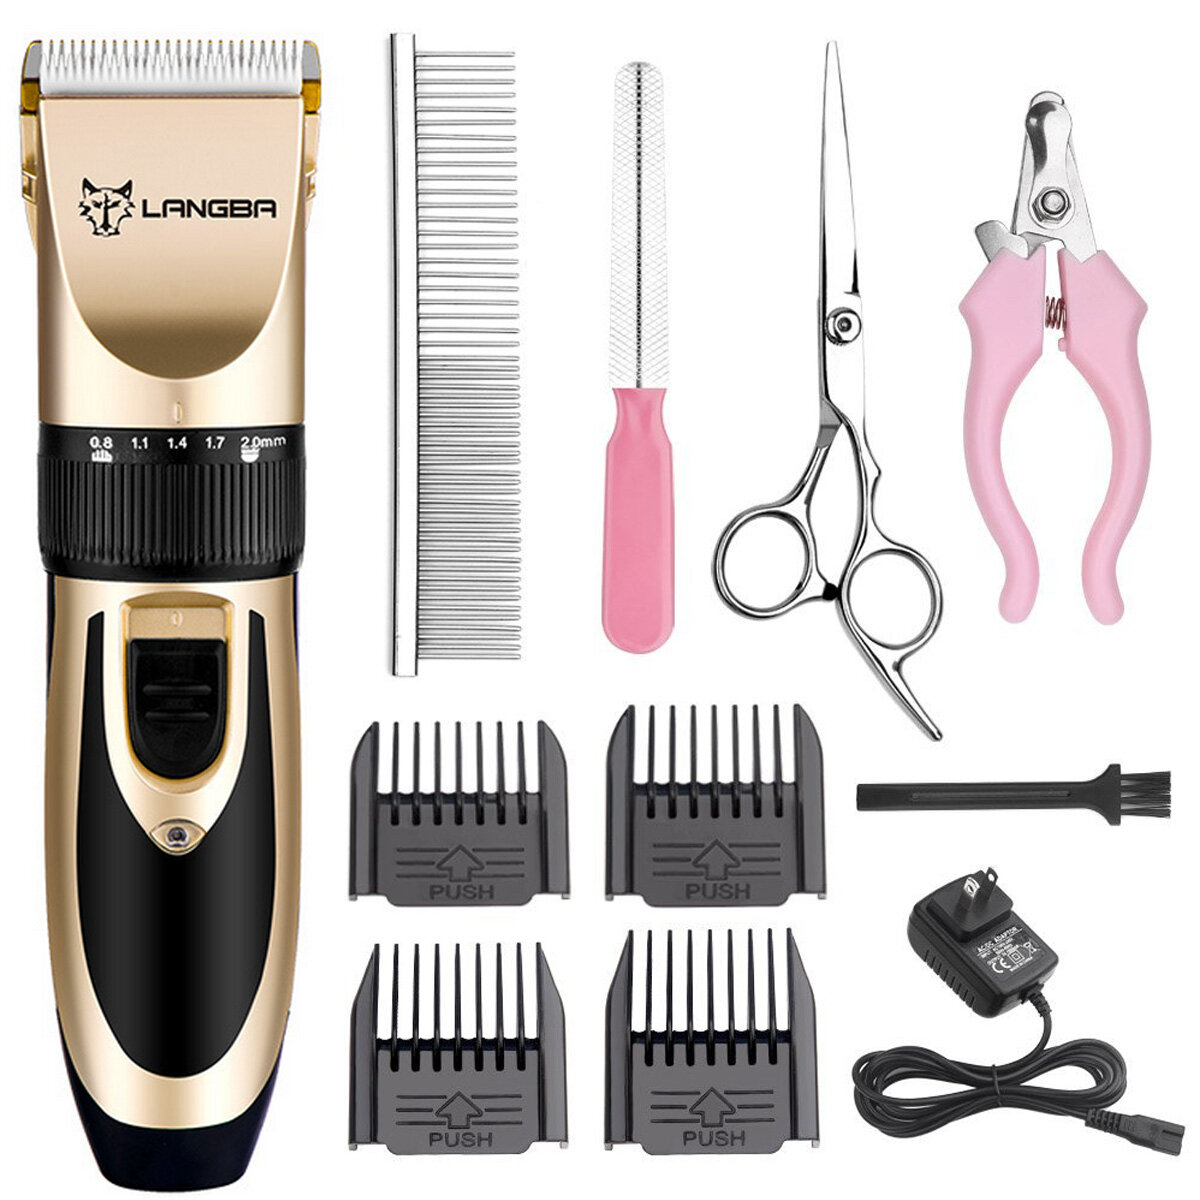 Electric Hair Clippers Scissors&Shears Shaver Trimmer Grooming Cordless Cat Dog Hair Trimmer-heyidear